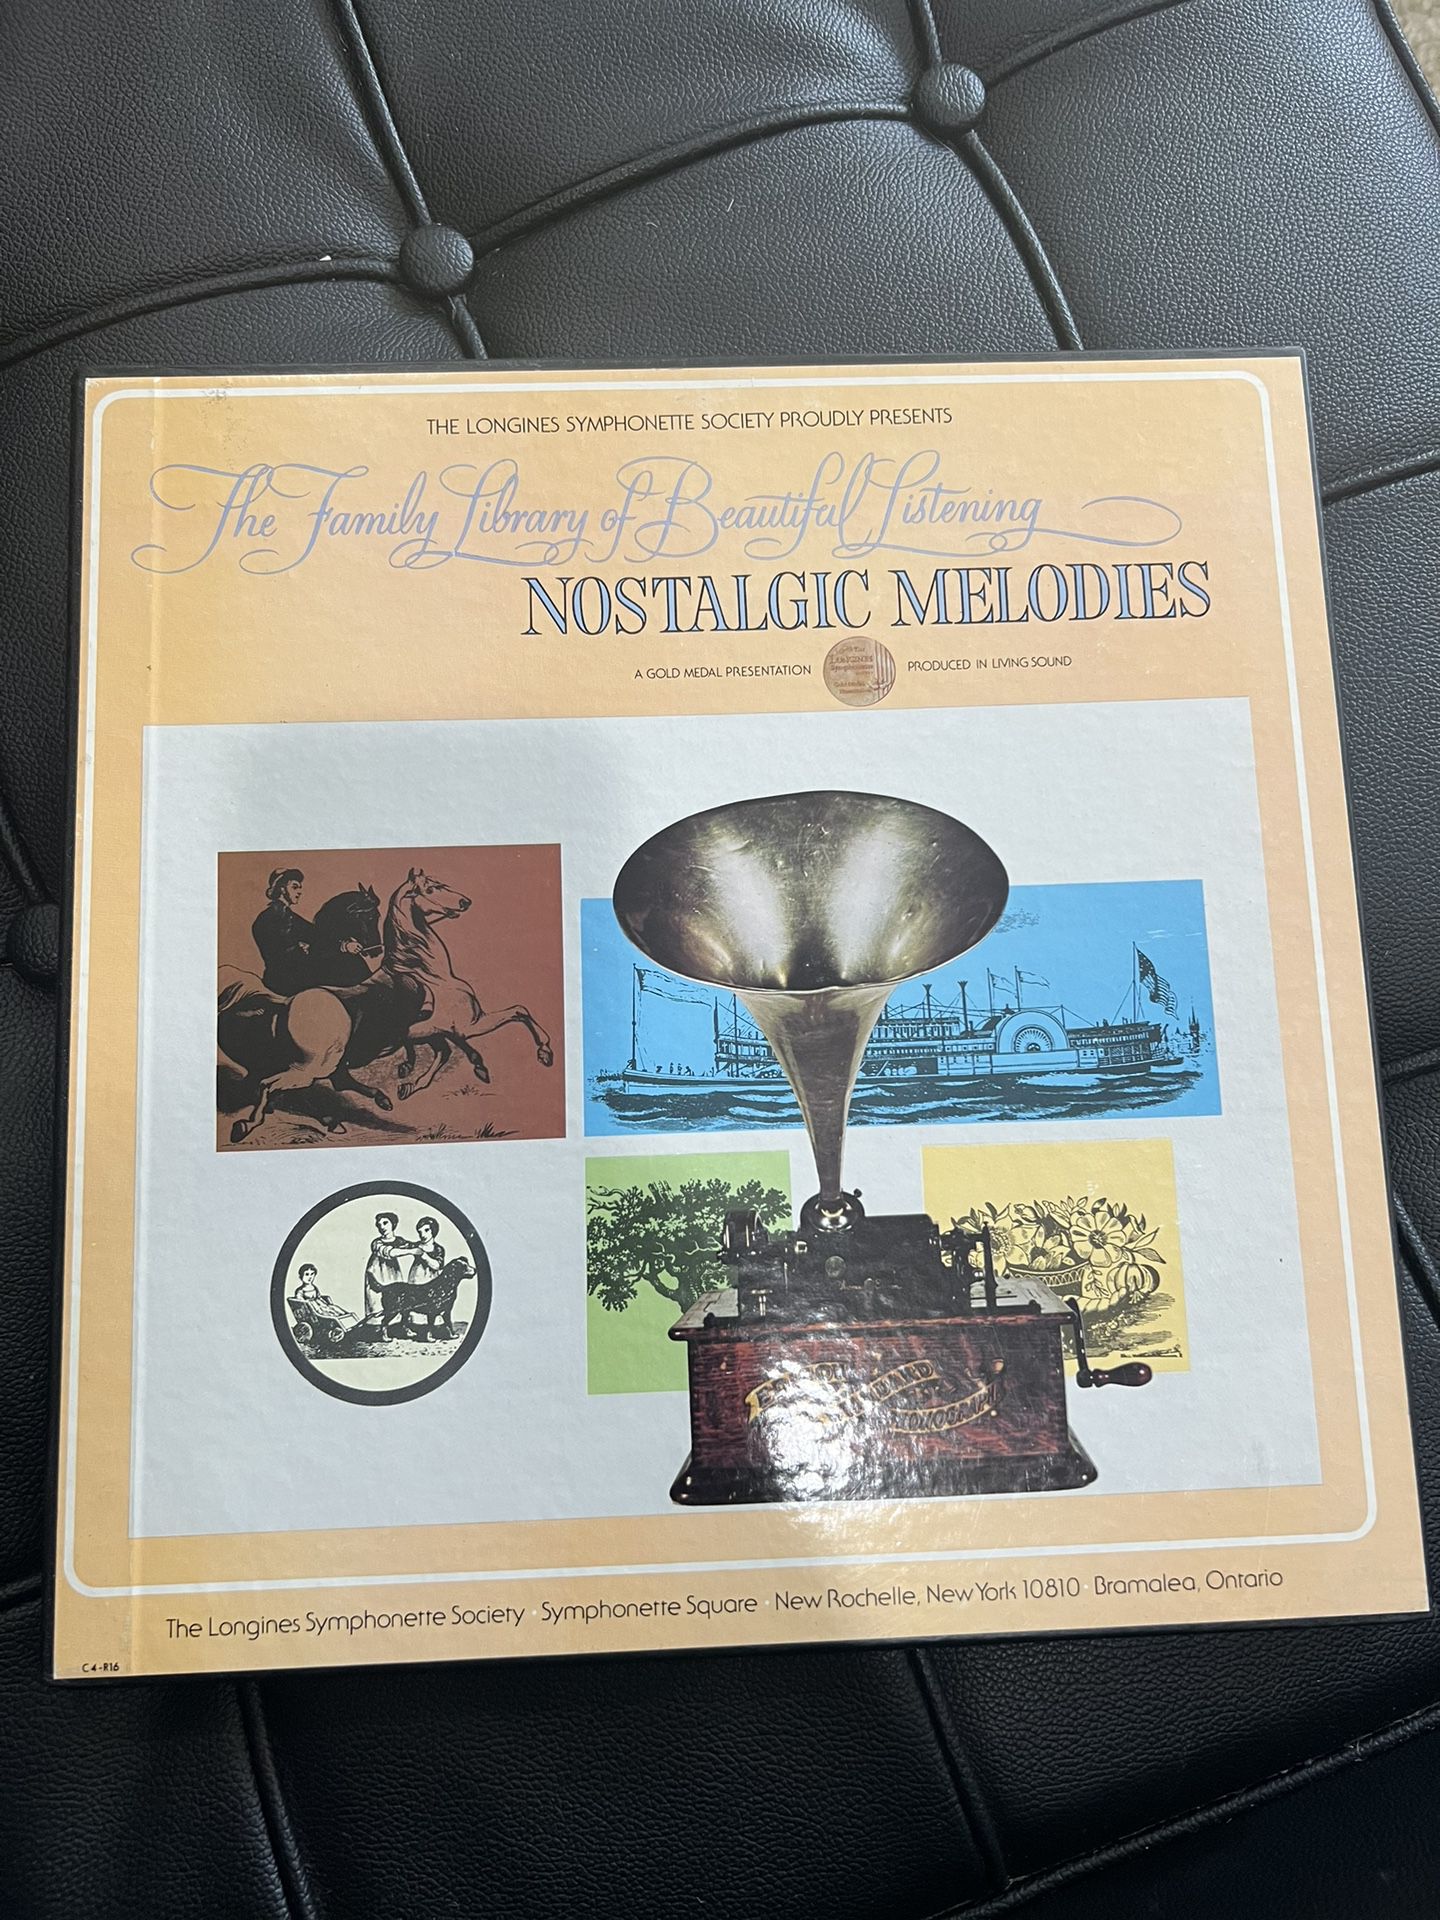 Nostalgic Melodies No. 16 in The Family Library of Beautiful Listening series